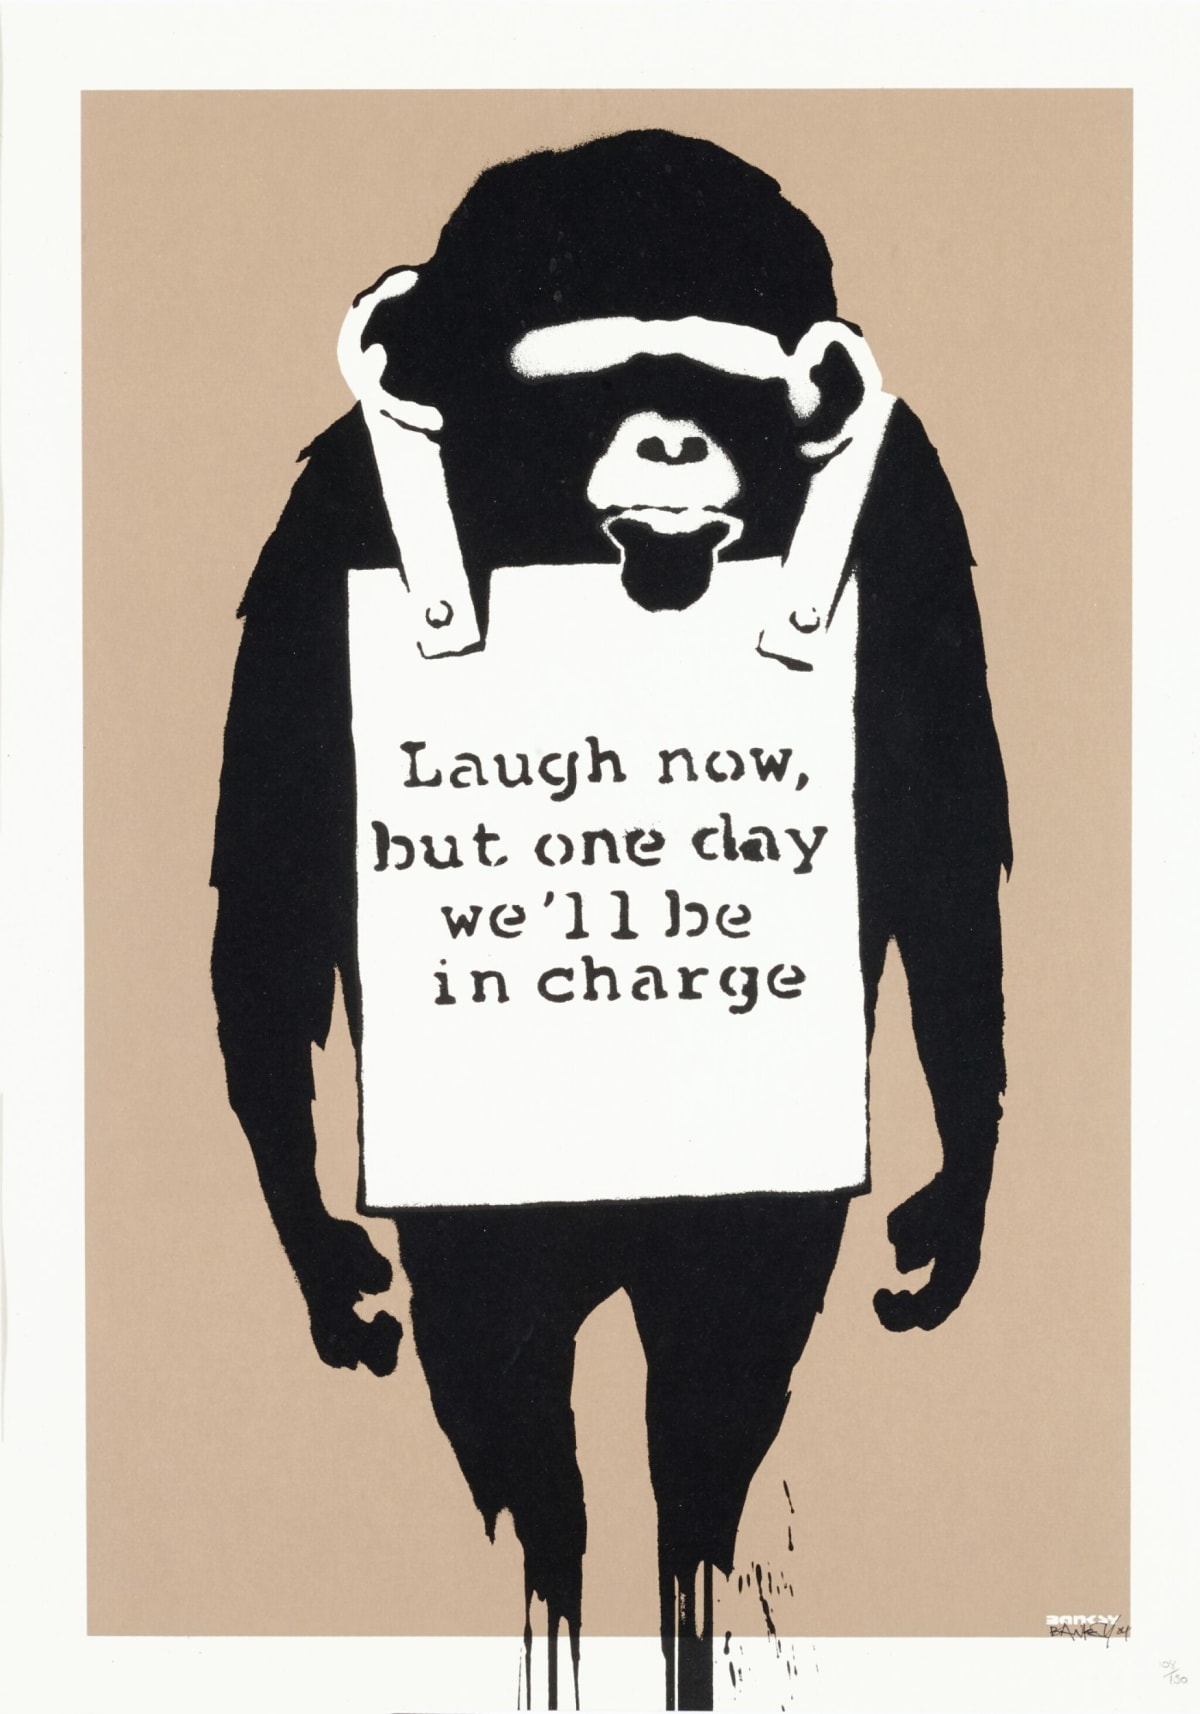 Banksy Laugh Now Print information and meaning